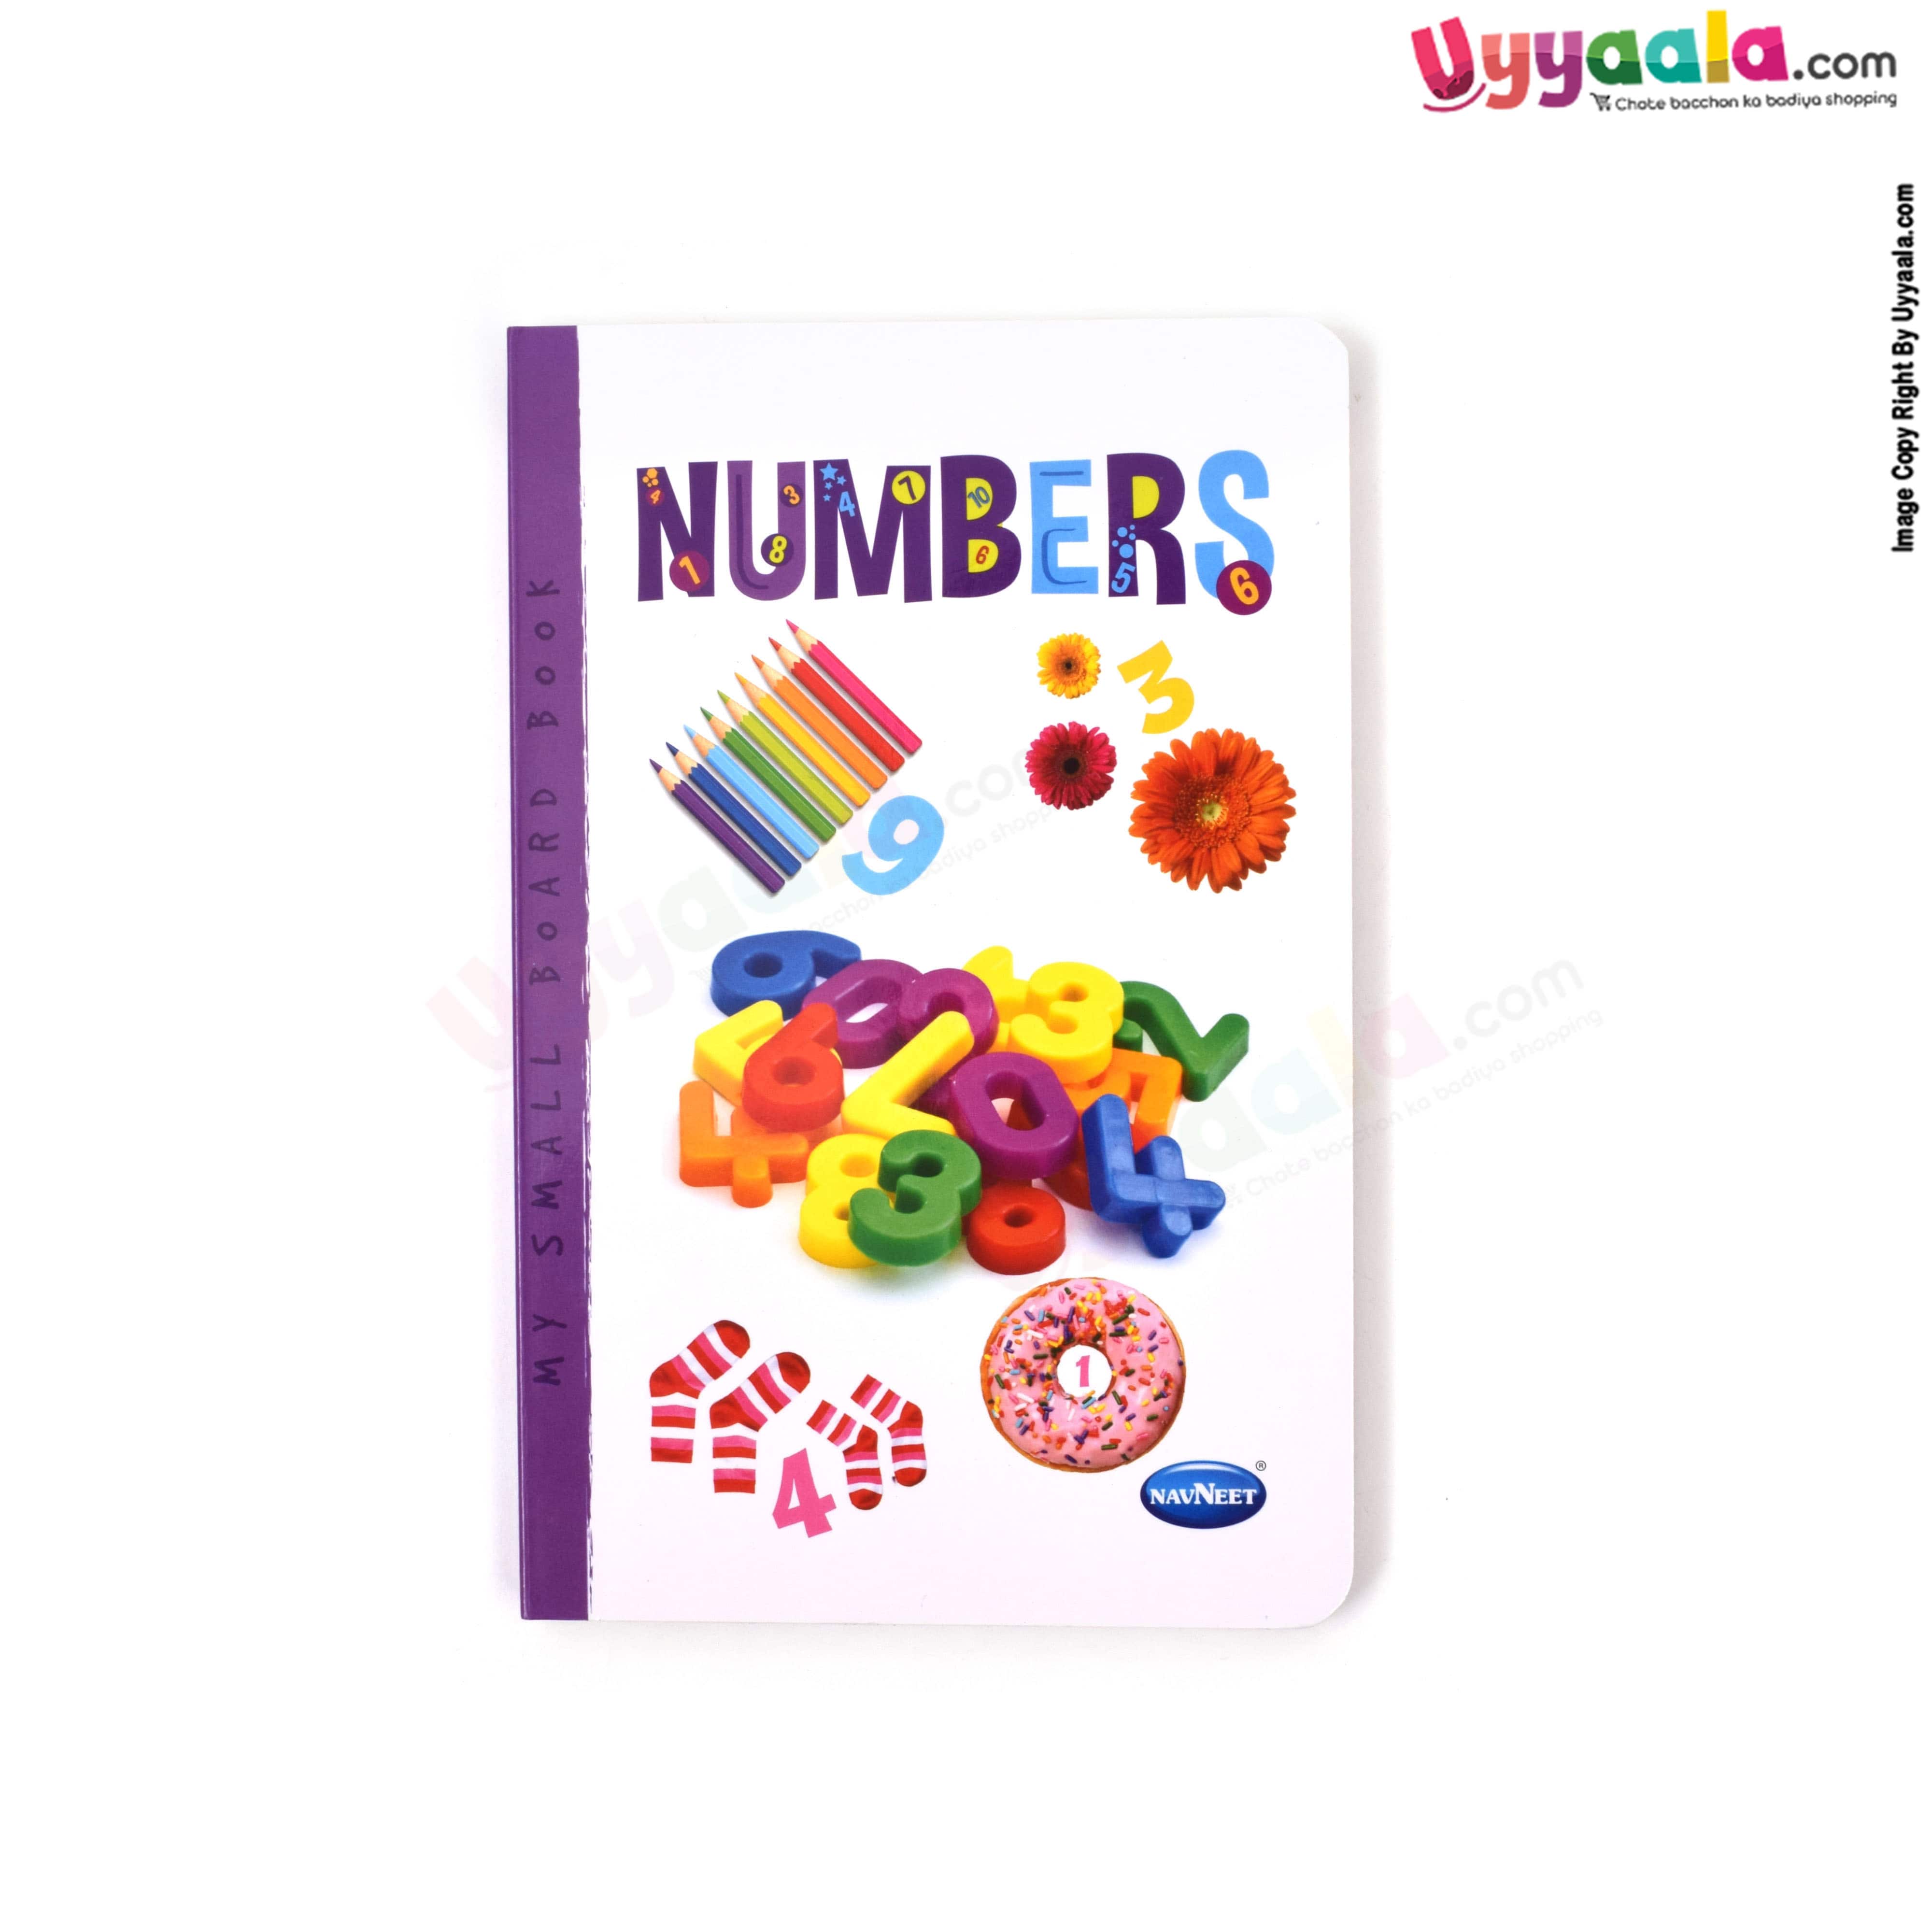 NAVNEET my small board book - numbers